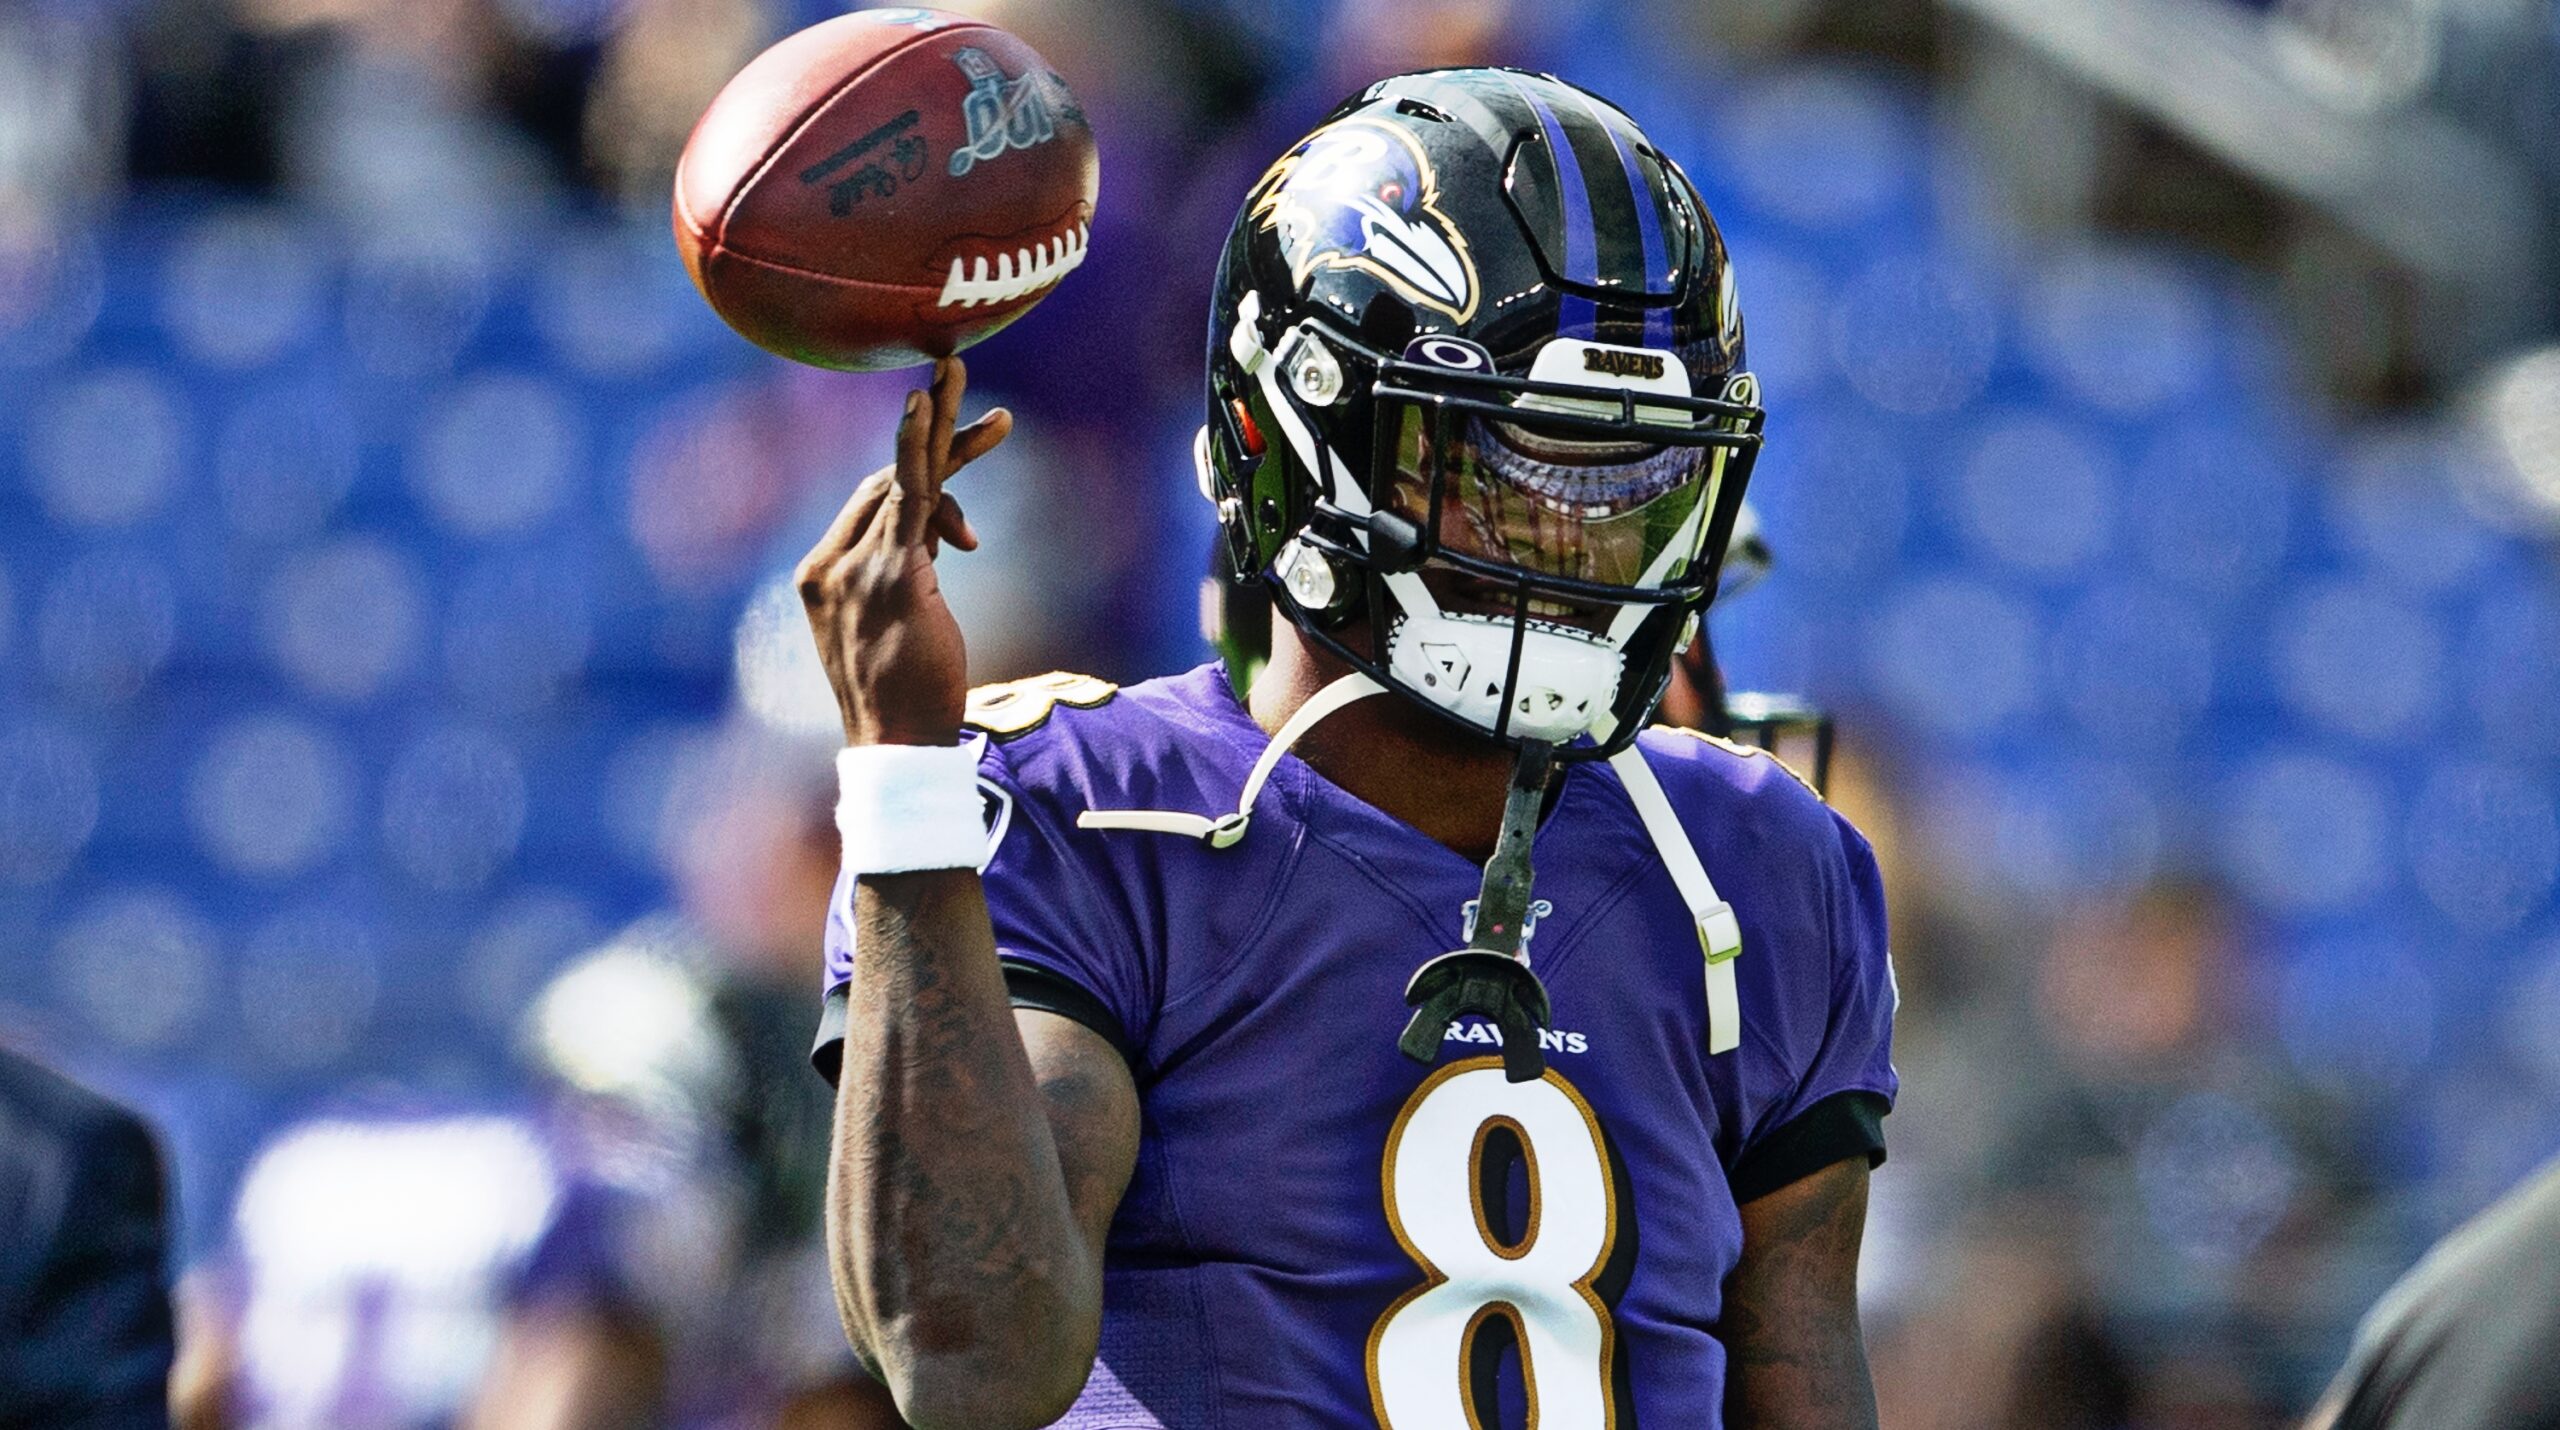 Lamar Jackson's Dream Season Ends With a Startling Loss - The New